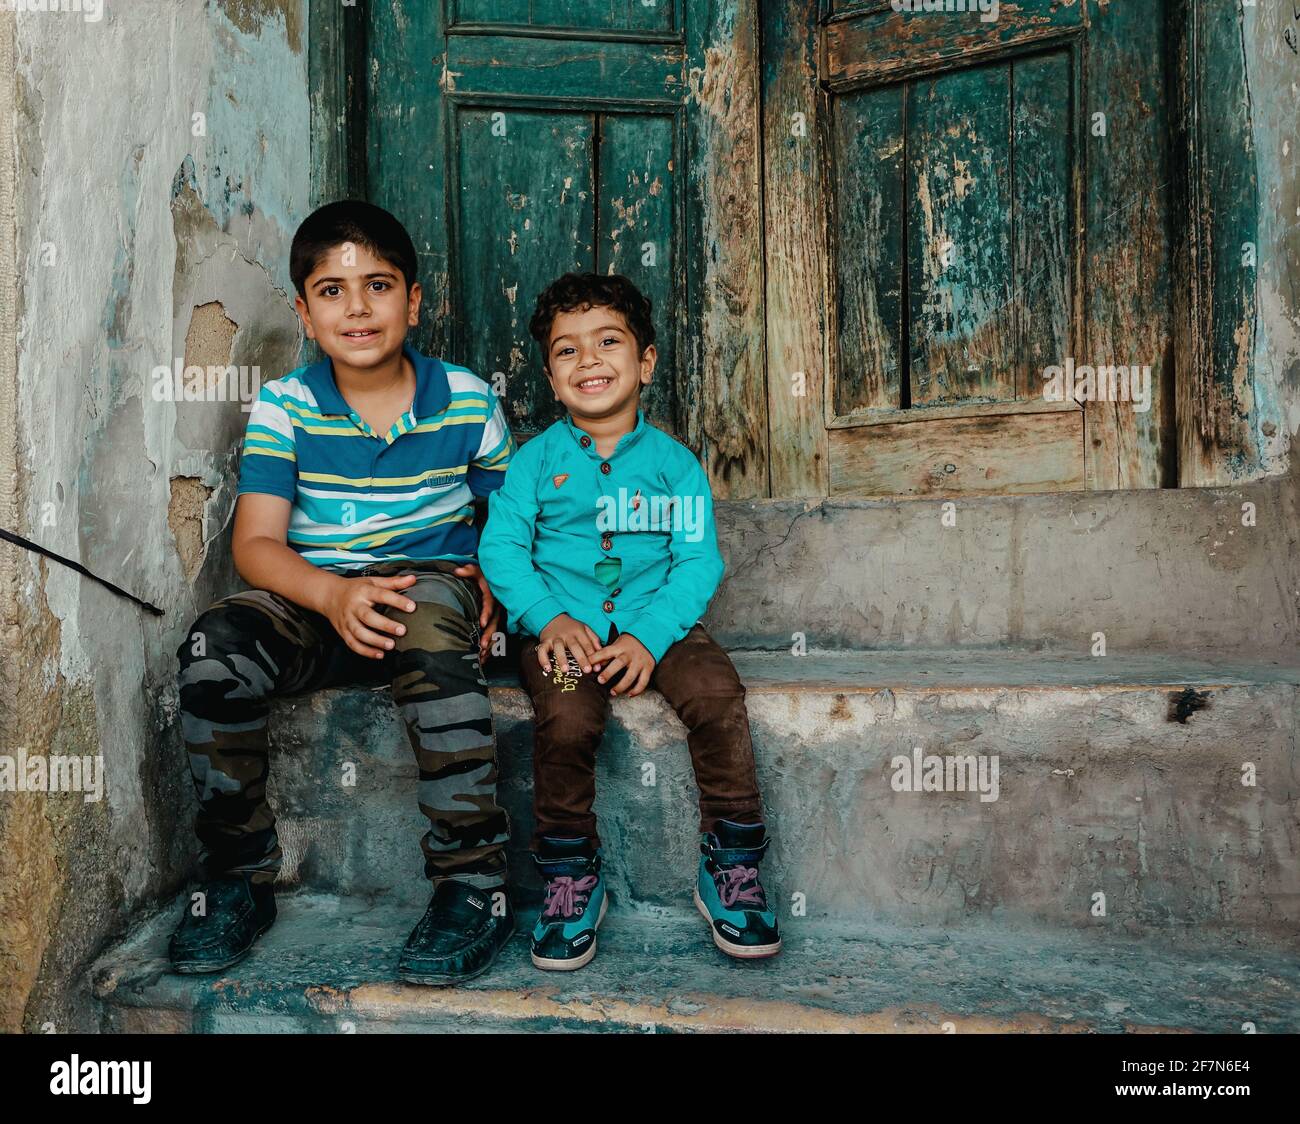 baghdad, Iraq - april 8, 2017:  two kids sitting on the old wood door Stock Photo